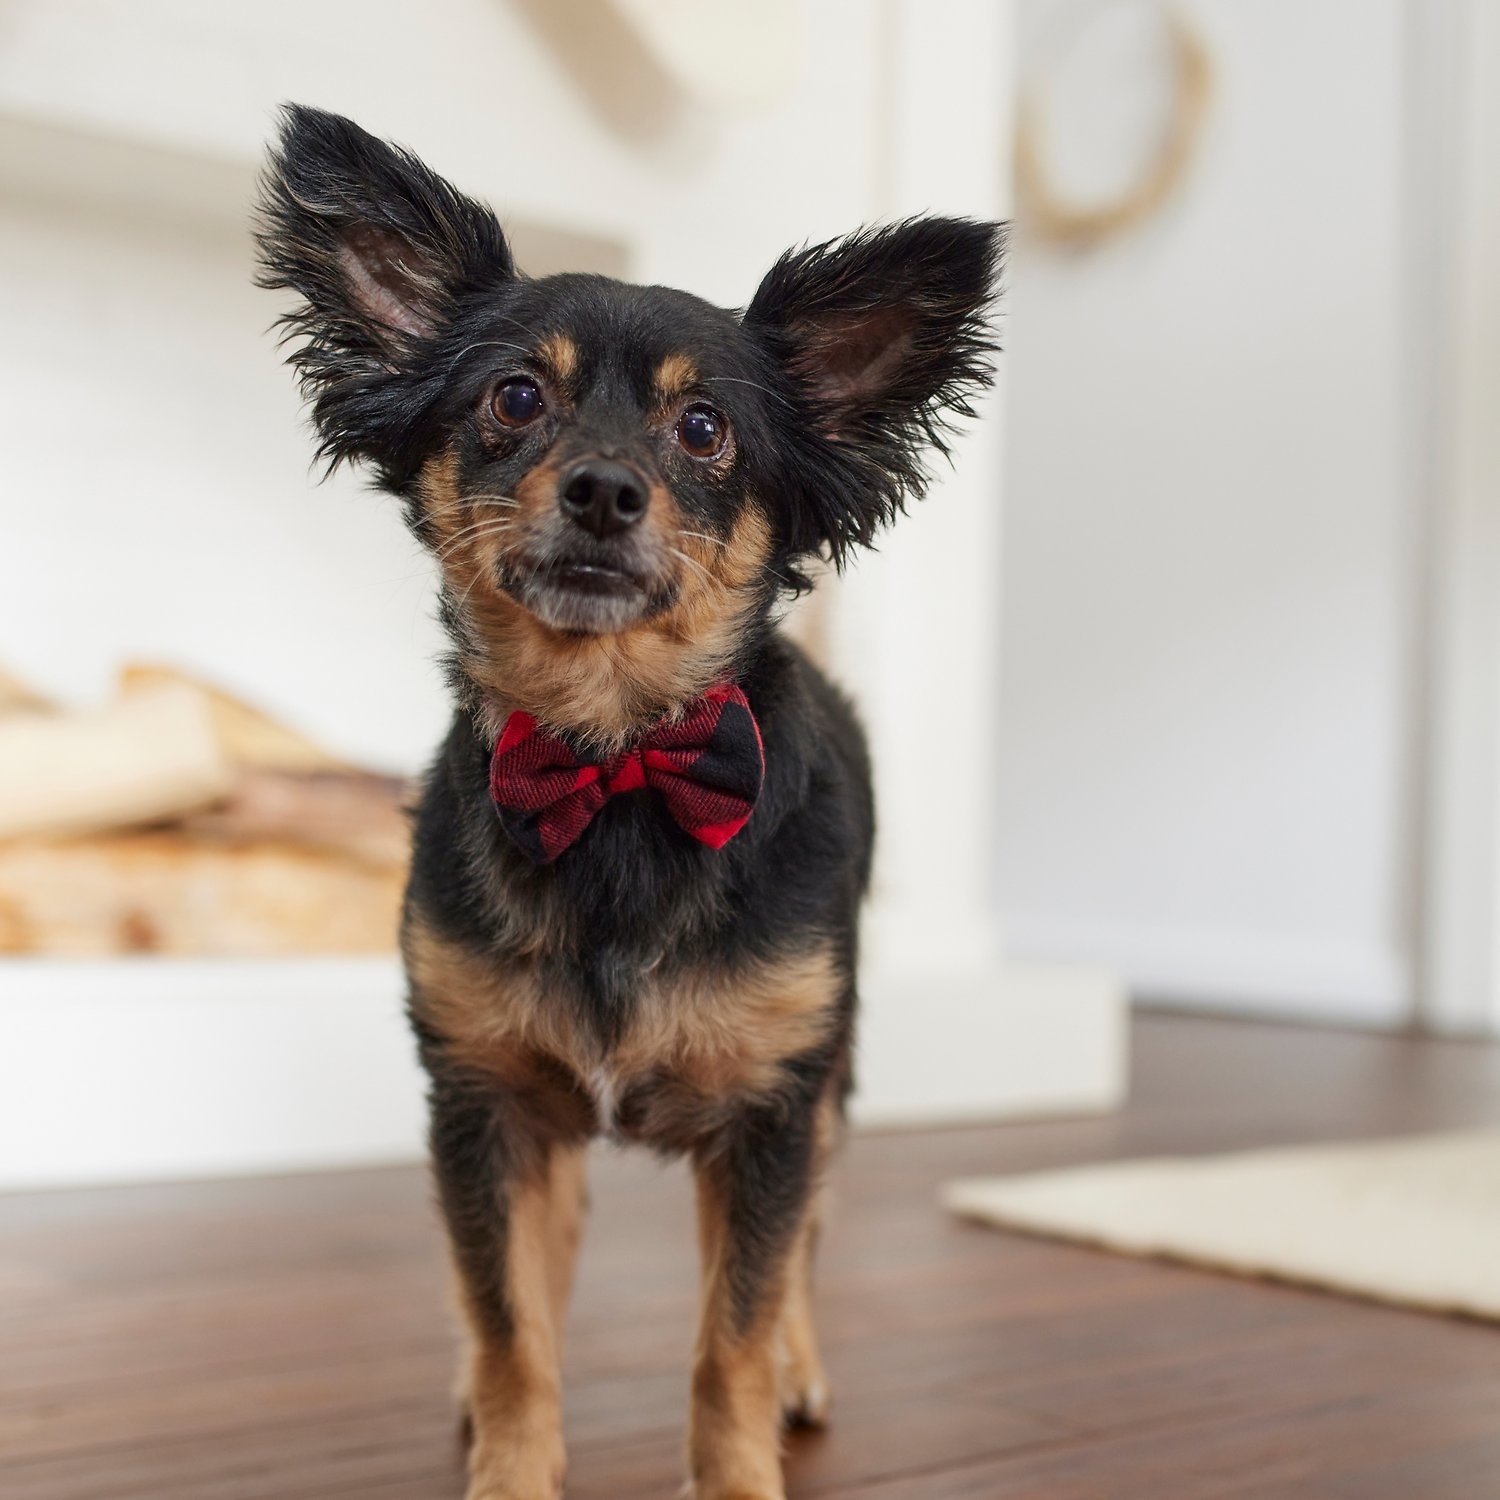 A dog wearing a plaid bow tie.